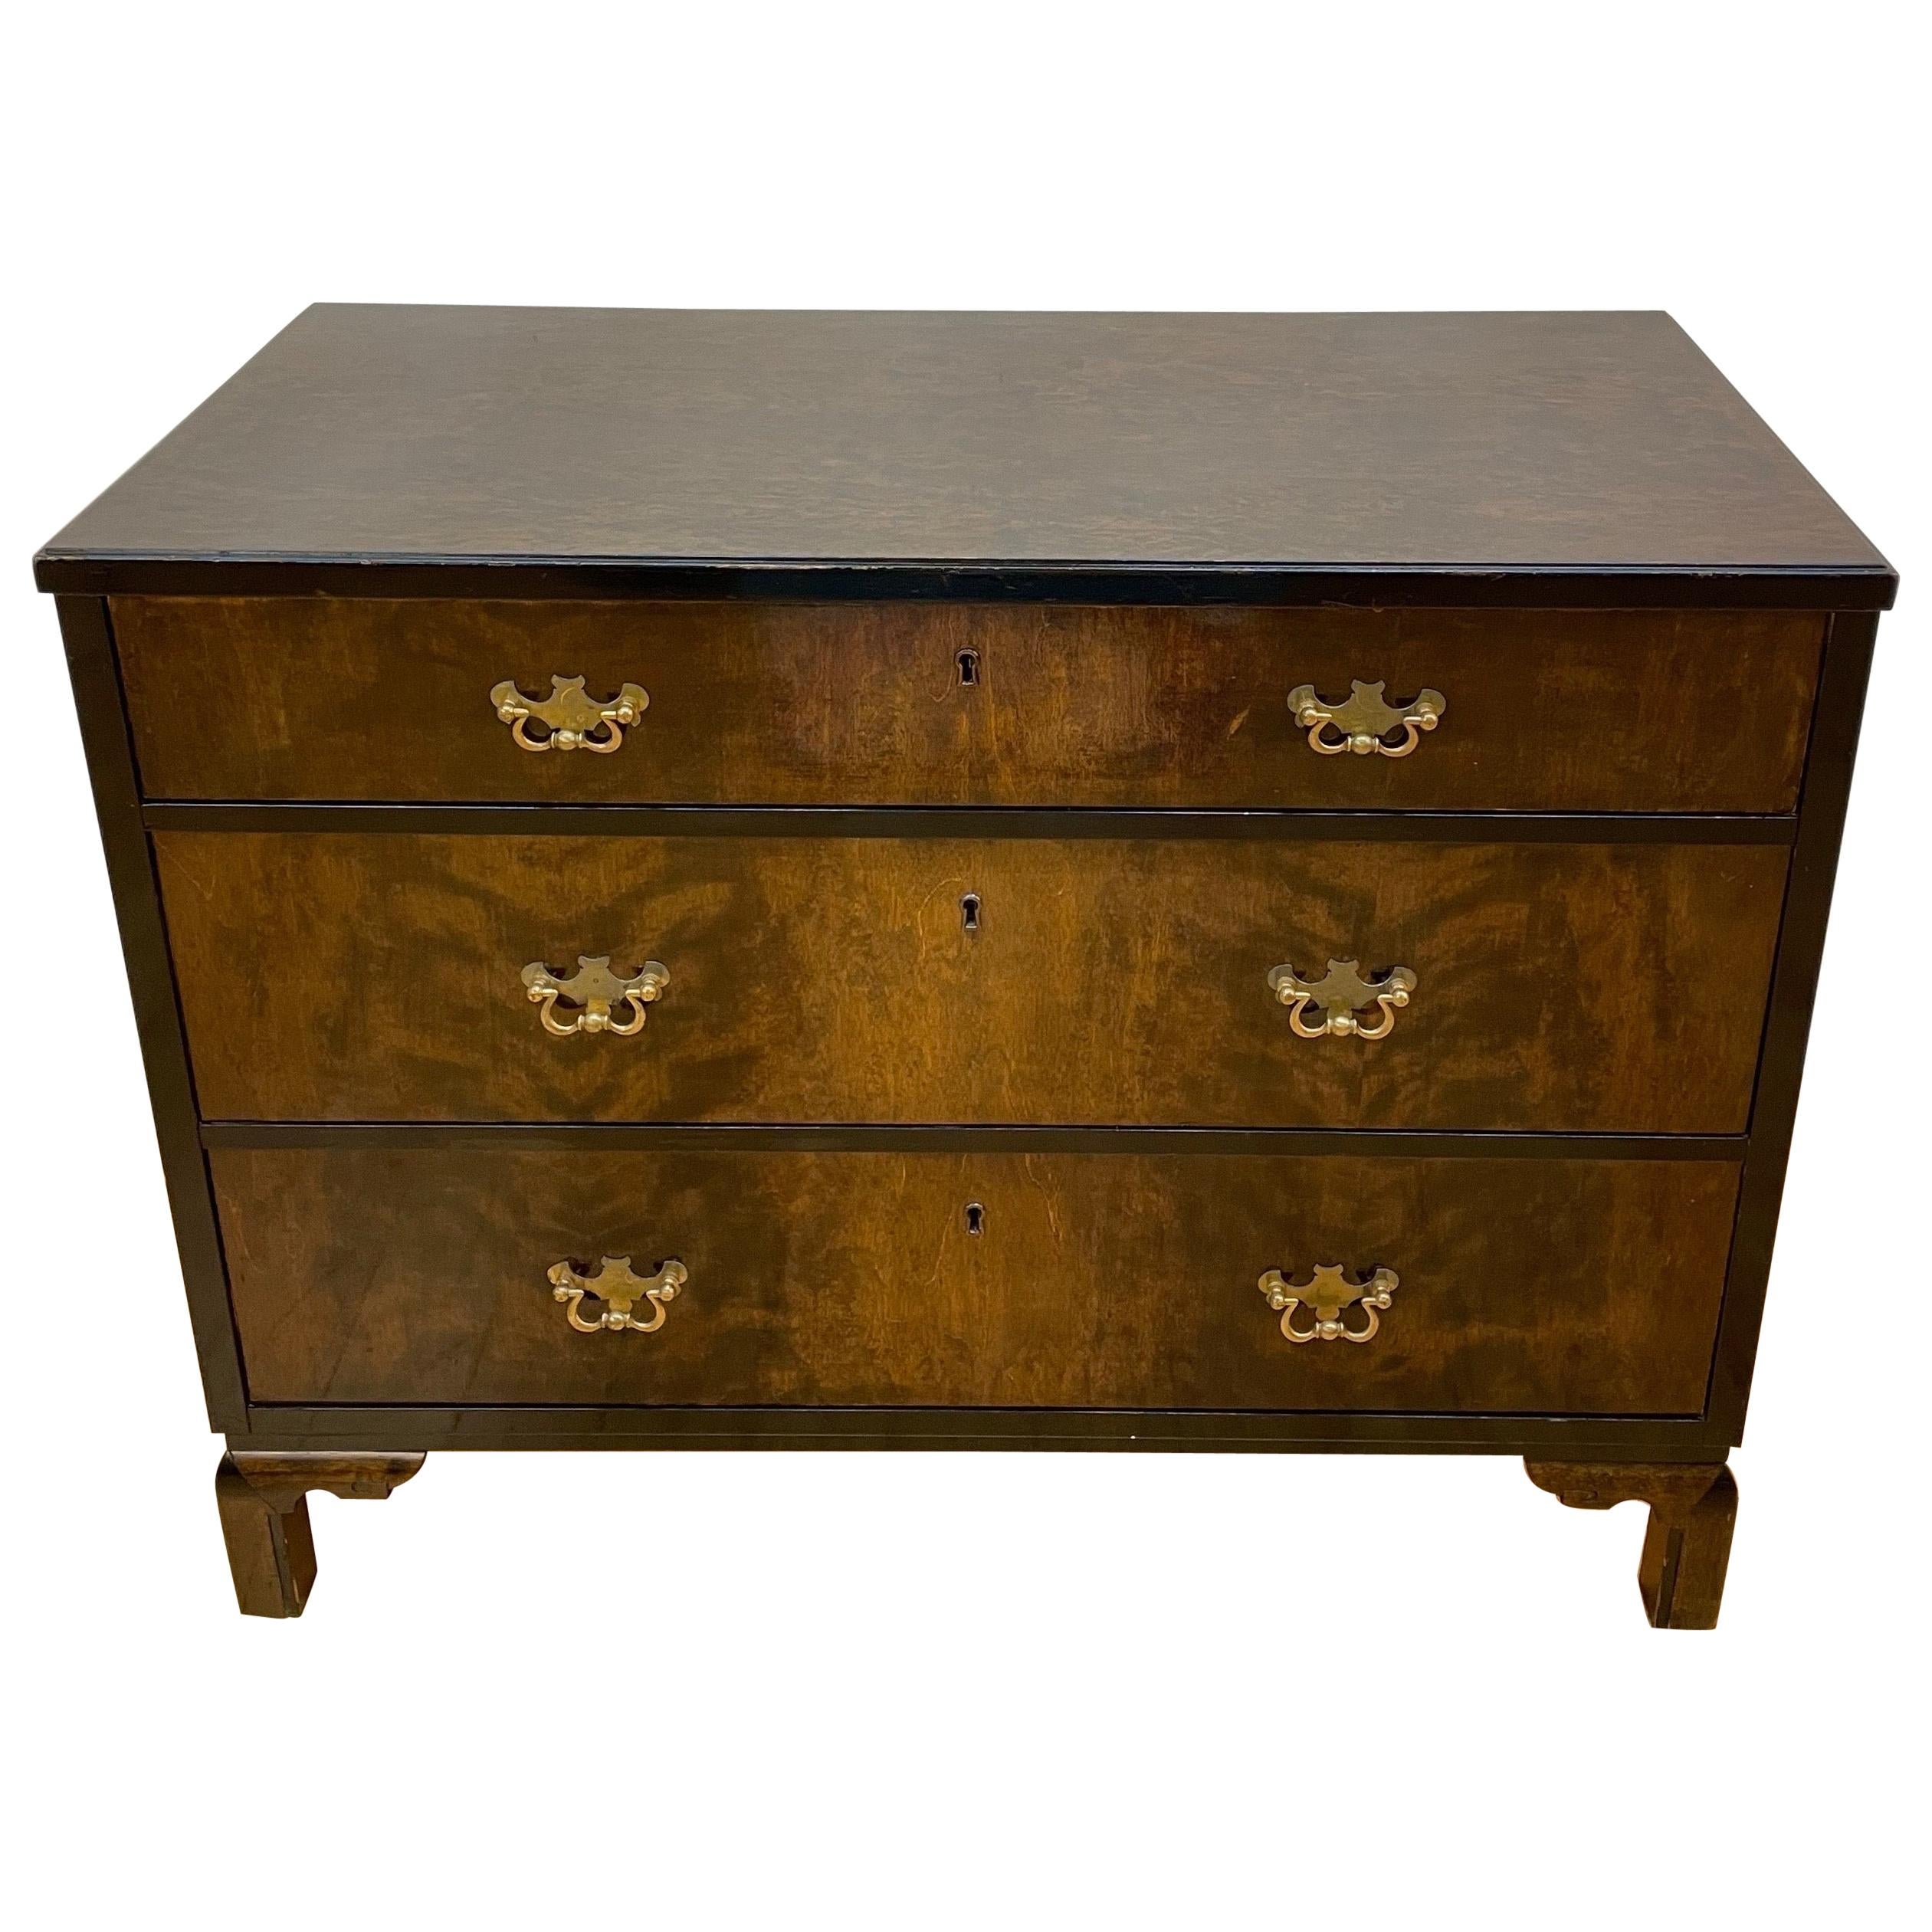 Neoclassical Revival Chest of Drawers